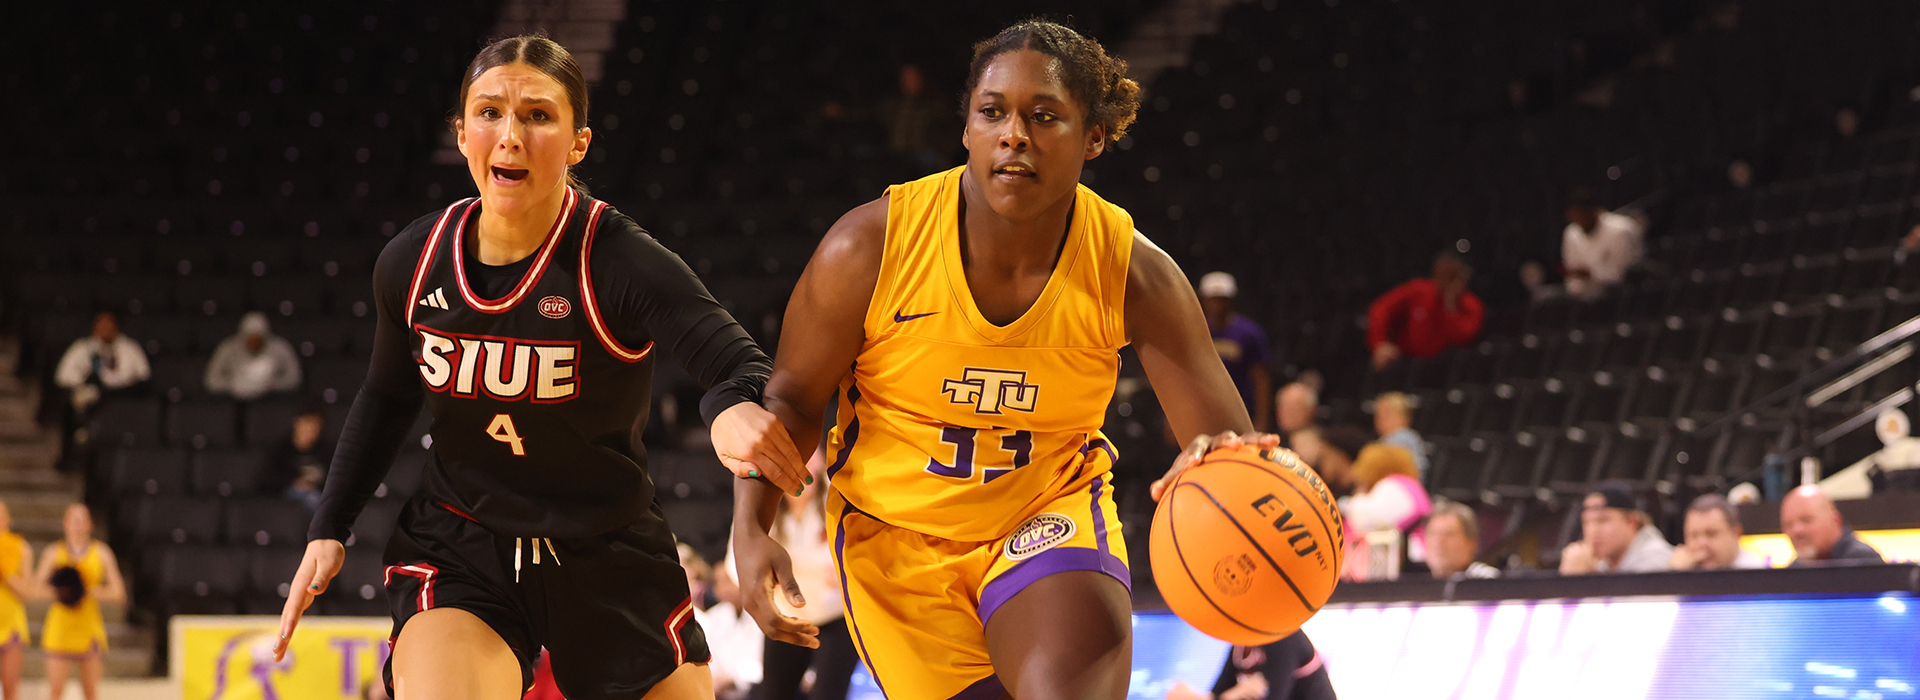 Golden Eagle women take fifth straight, avoid SIUE rally